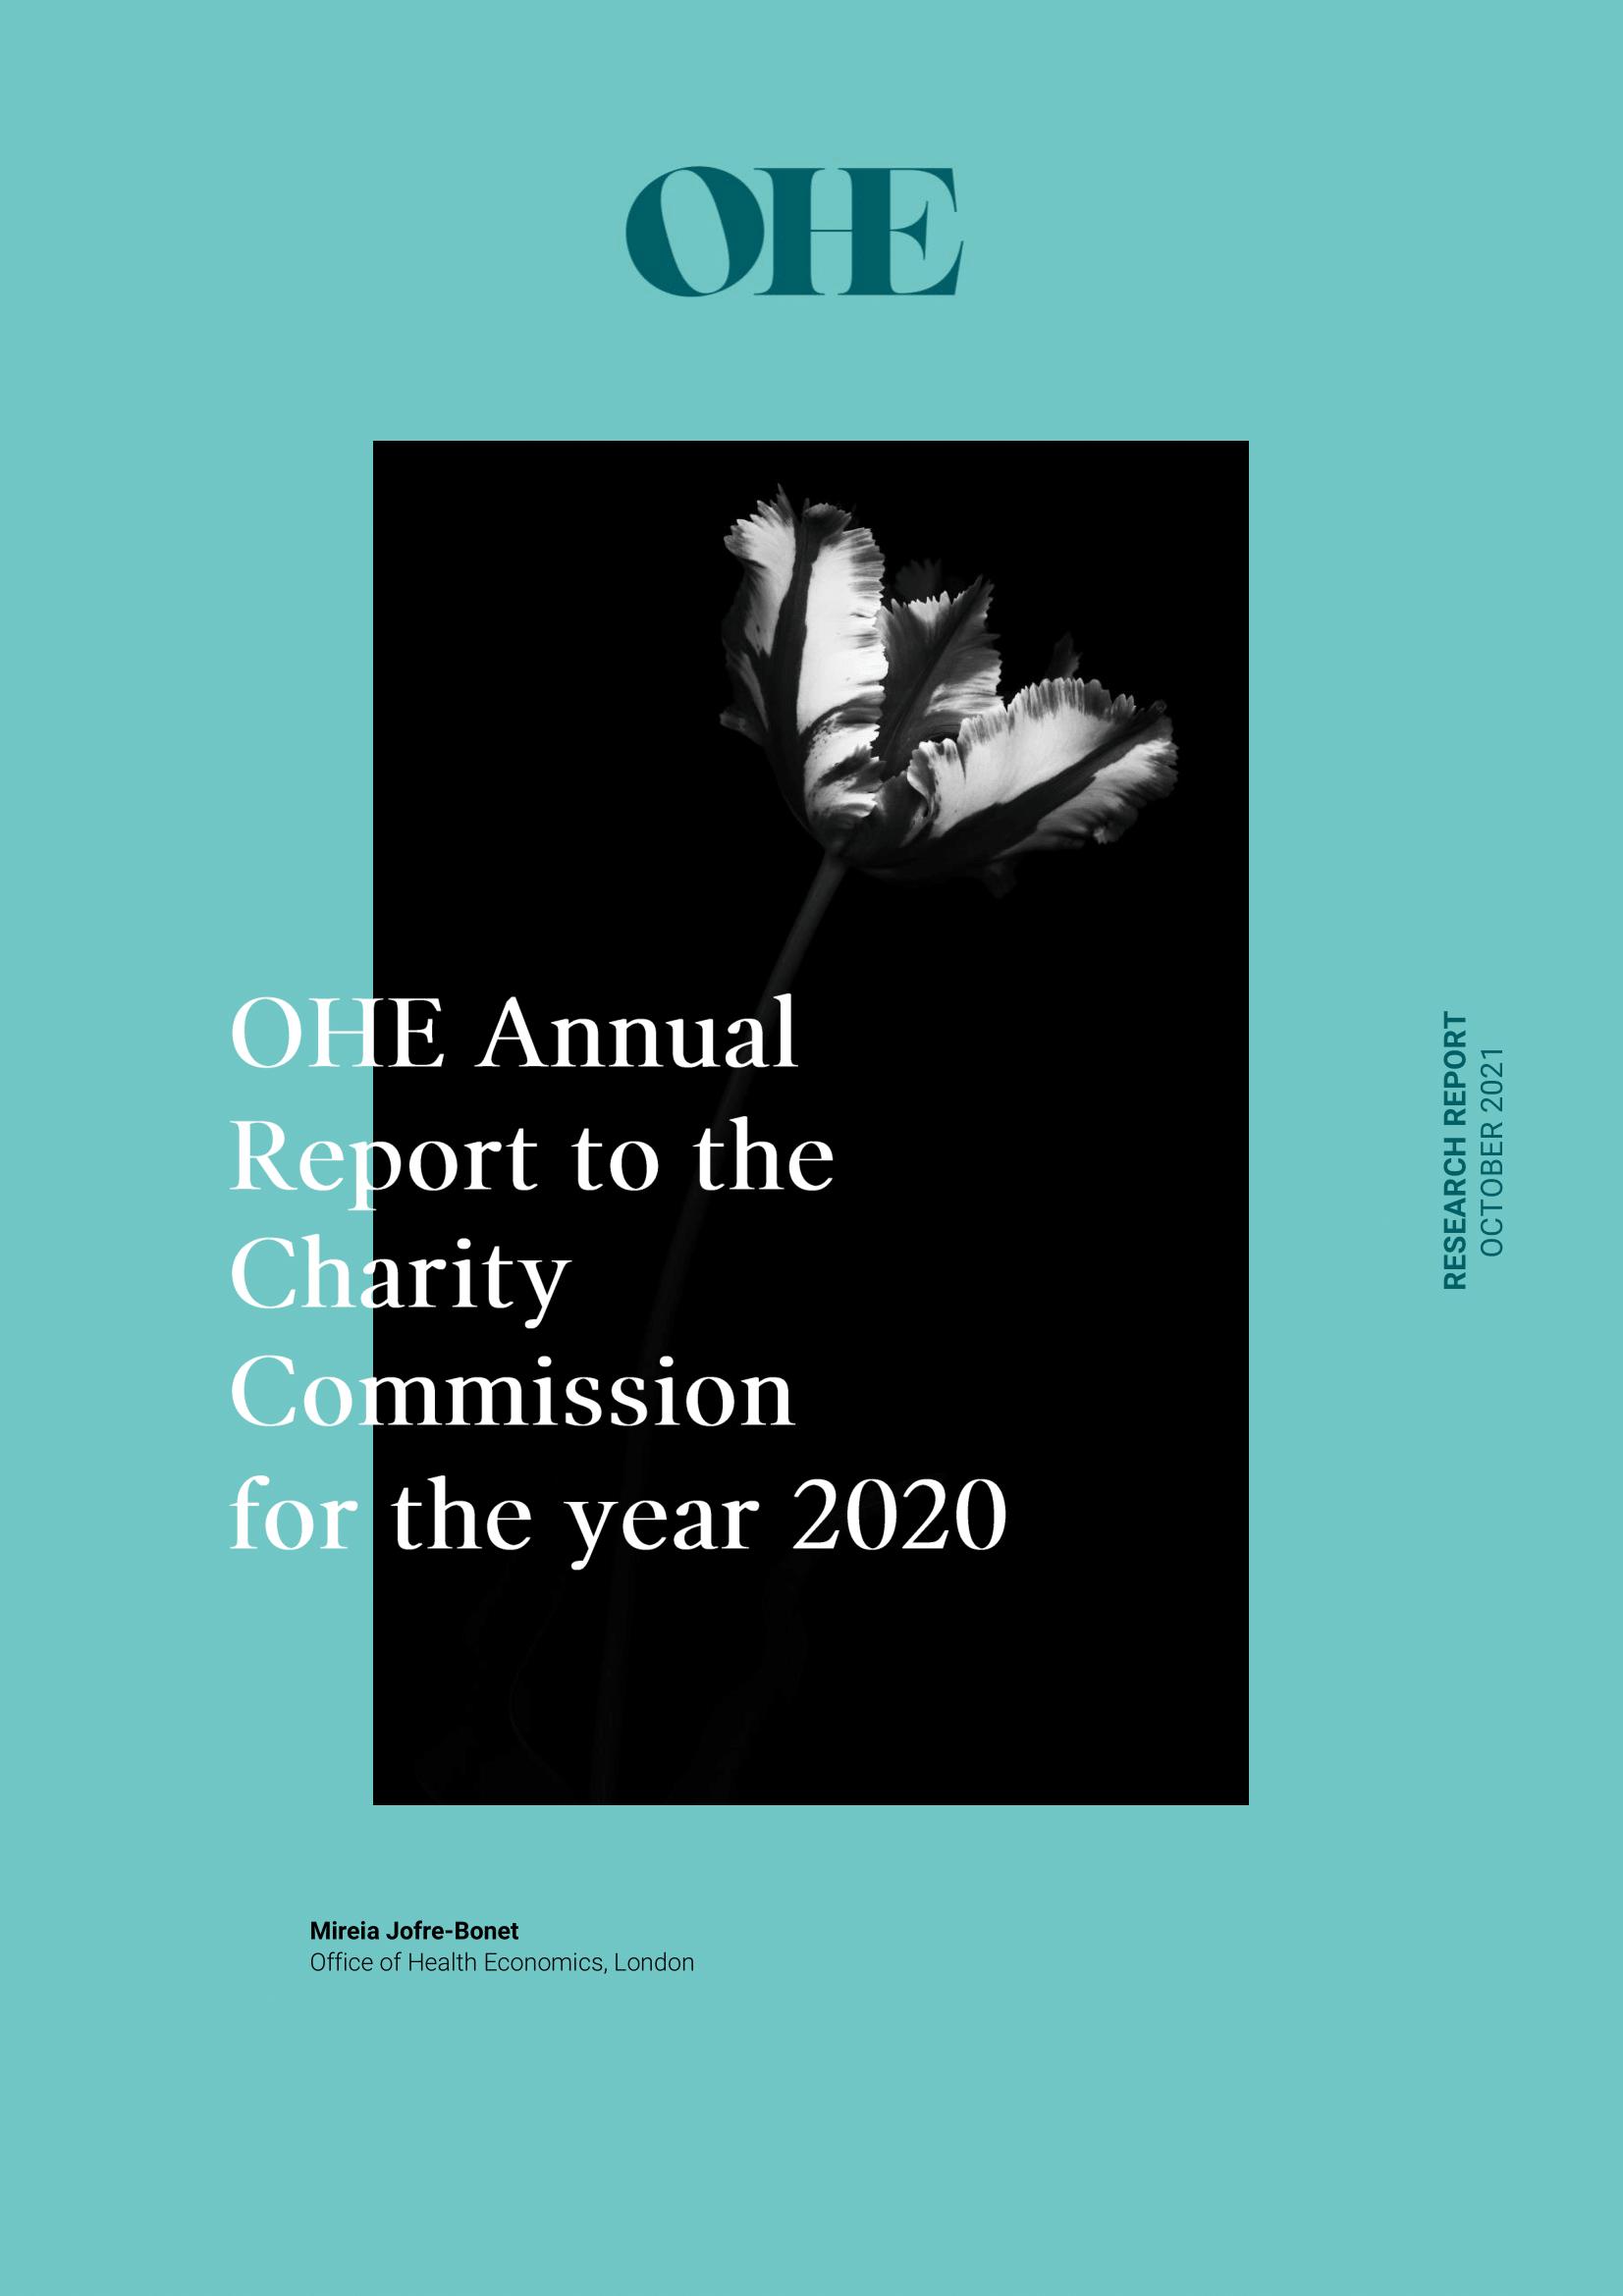 2020 OHE Annual Report to the Charity Commission